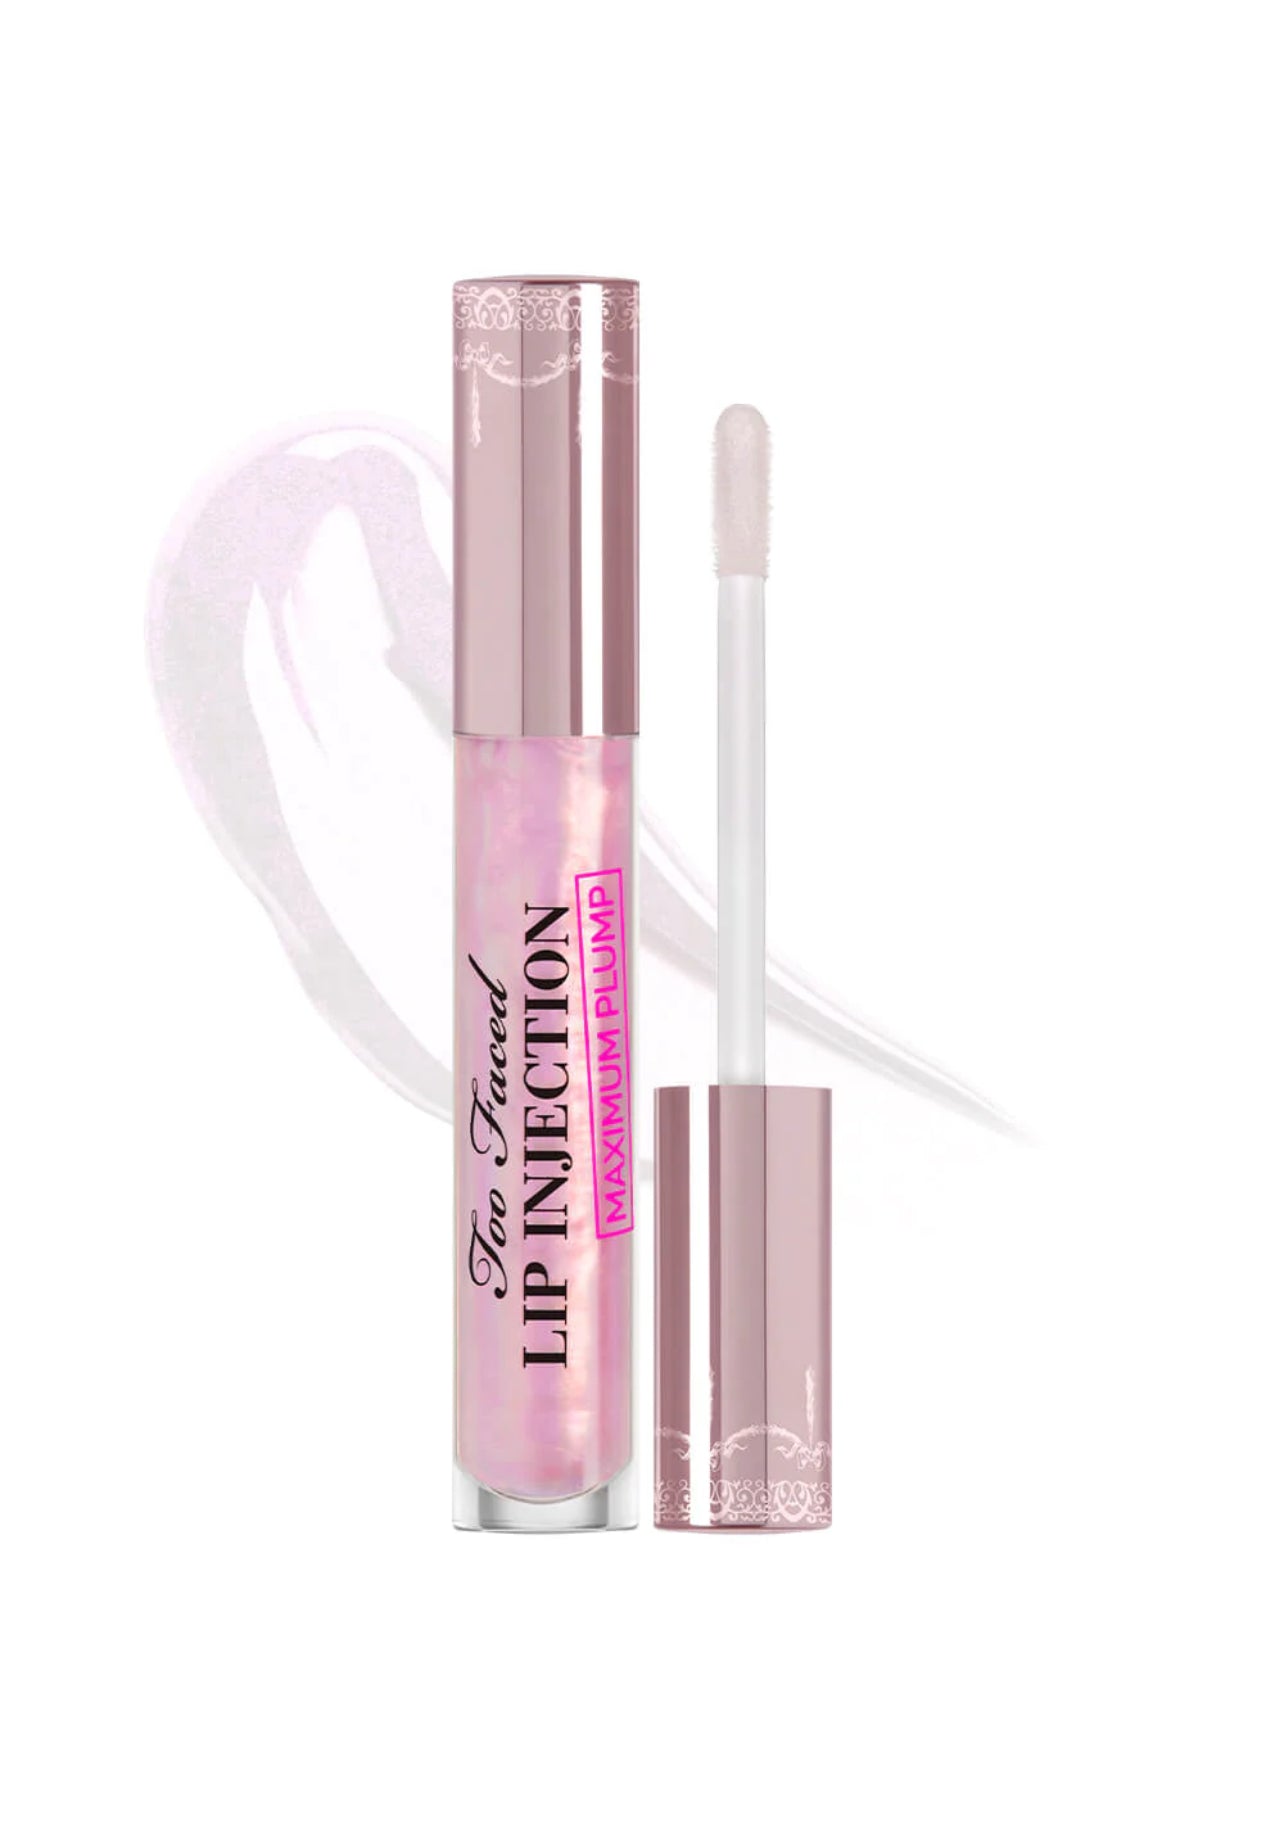 SEXY LIPS & LASHES MASCARA AND LIP PLUMPER SET - TOO FACED